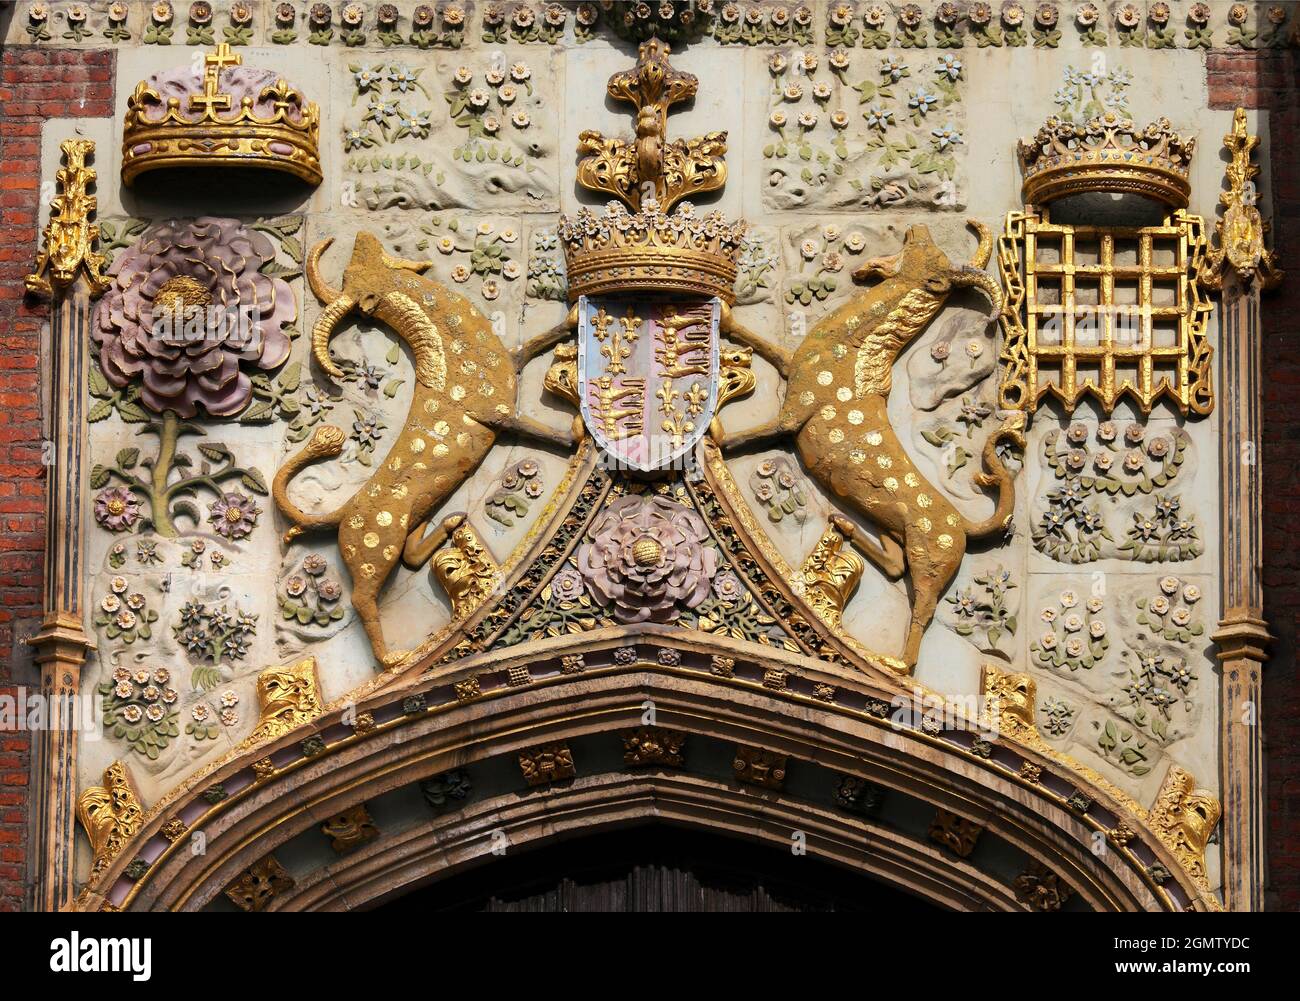 Cambridge, England - 22 July 2009; no people in view. Here we see the beautiful and distinctive carvings above the main entrance to St John's College, Stock Photo